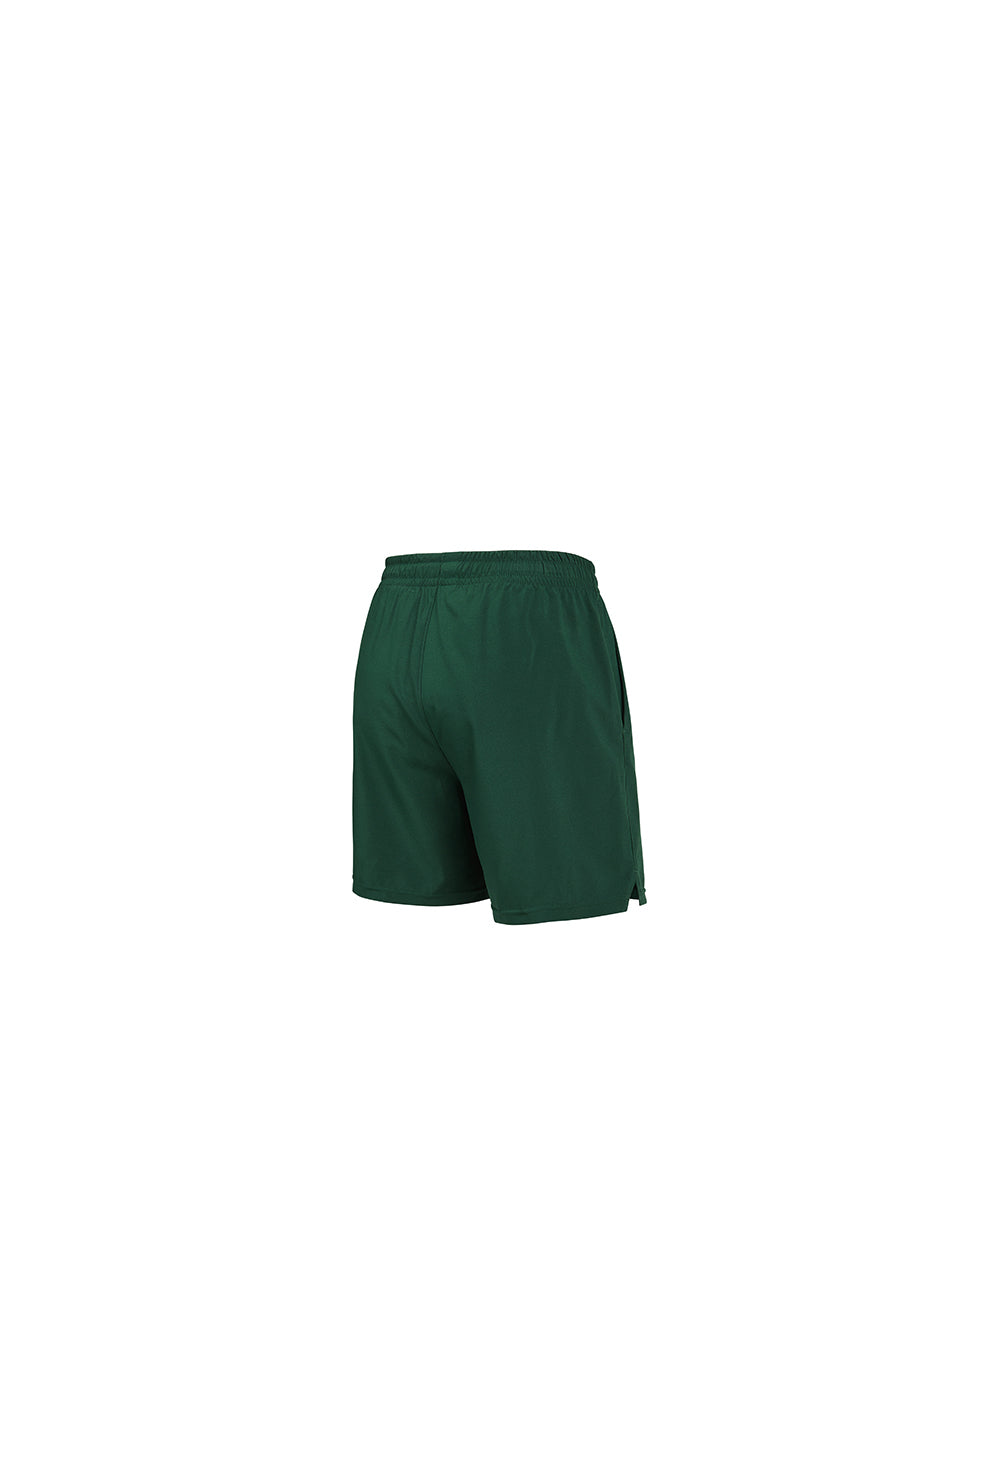 Multiple Action 6 Inch Shorts - Field Green